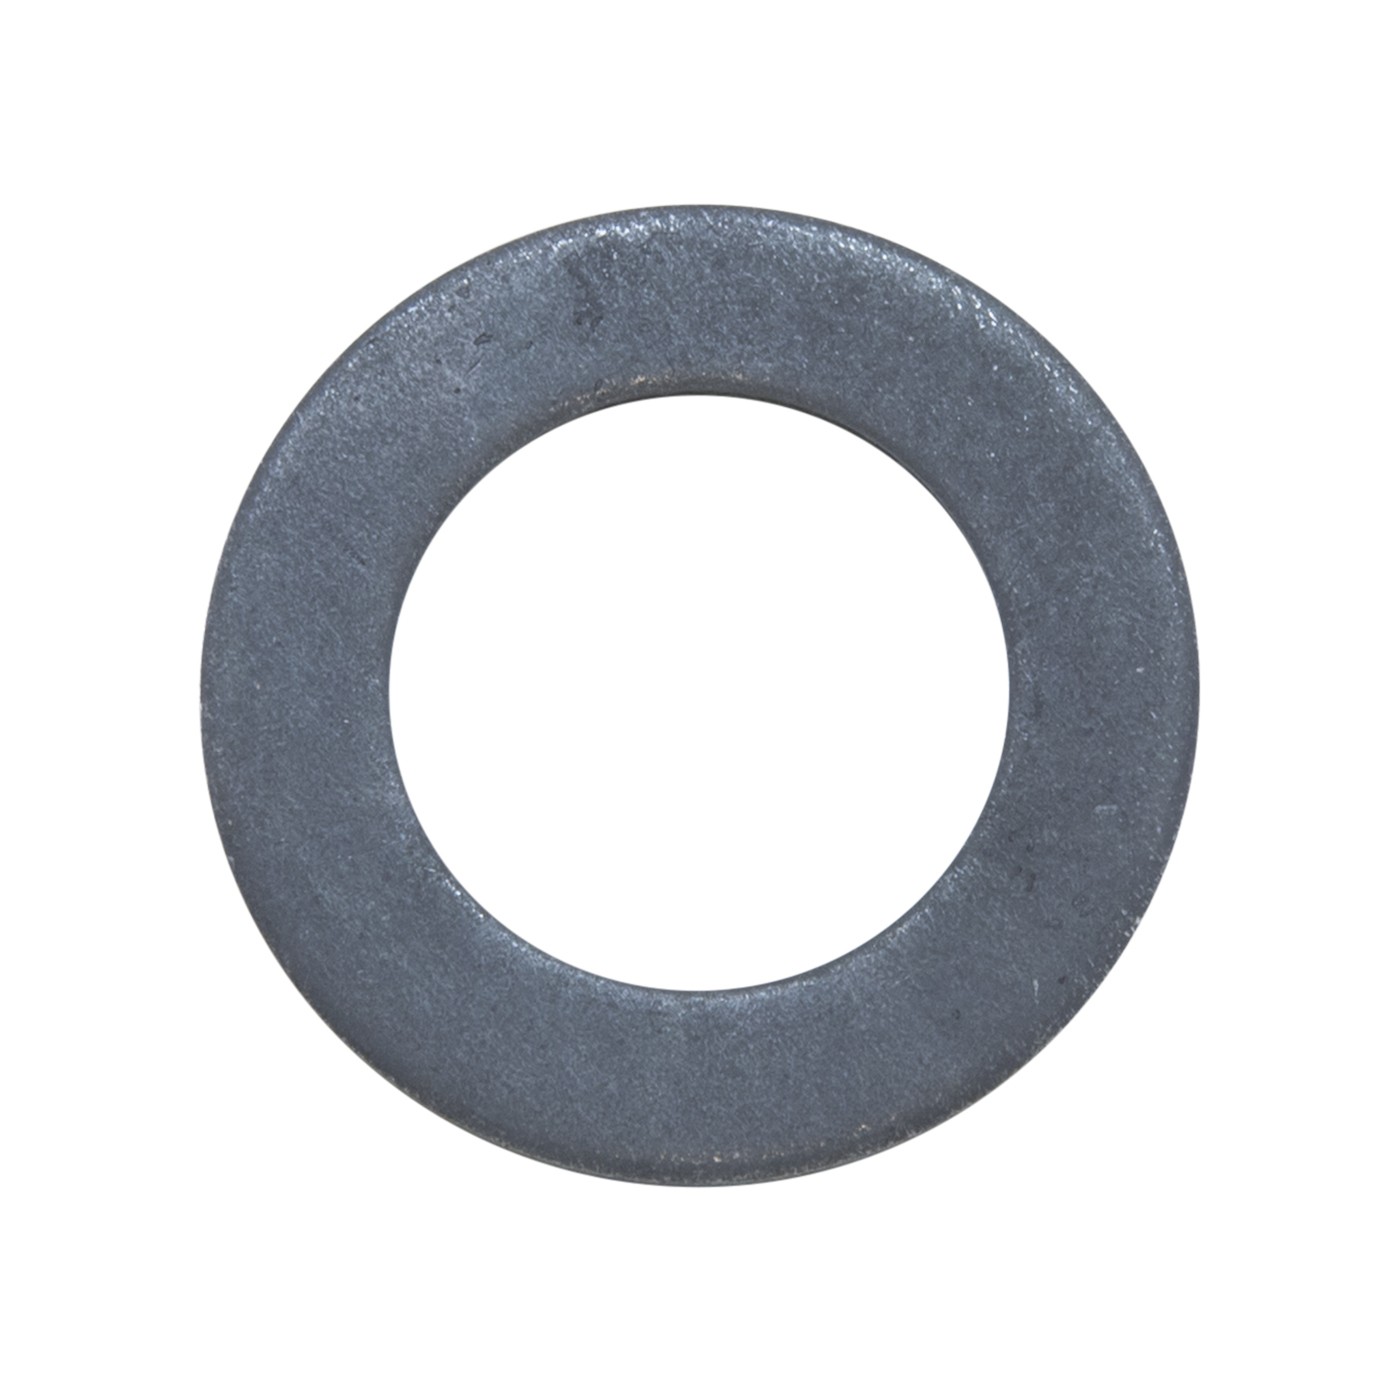 Outer stub axle nut washer for Dodge Dana 44 & 60